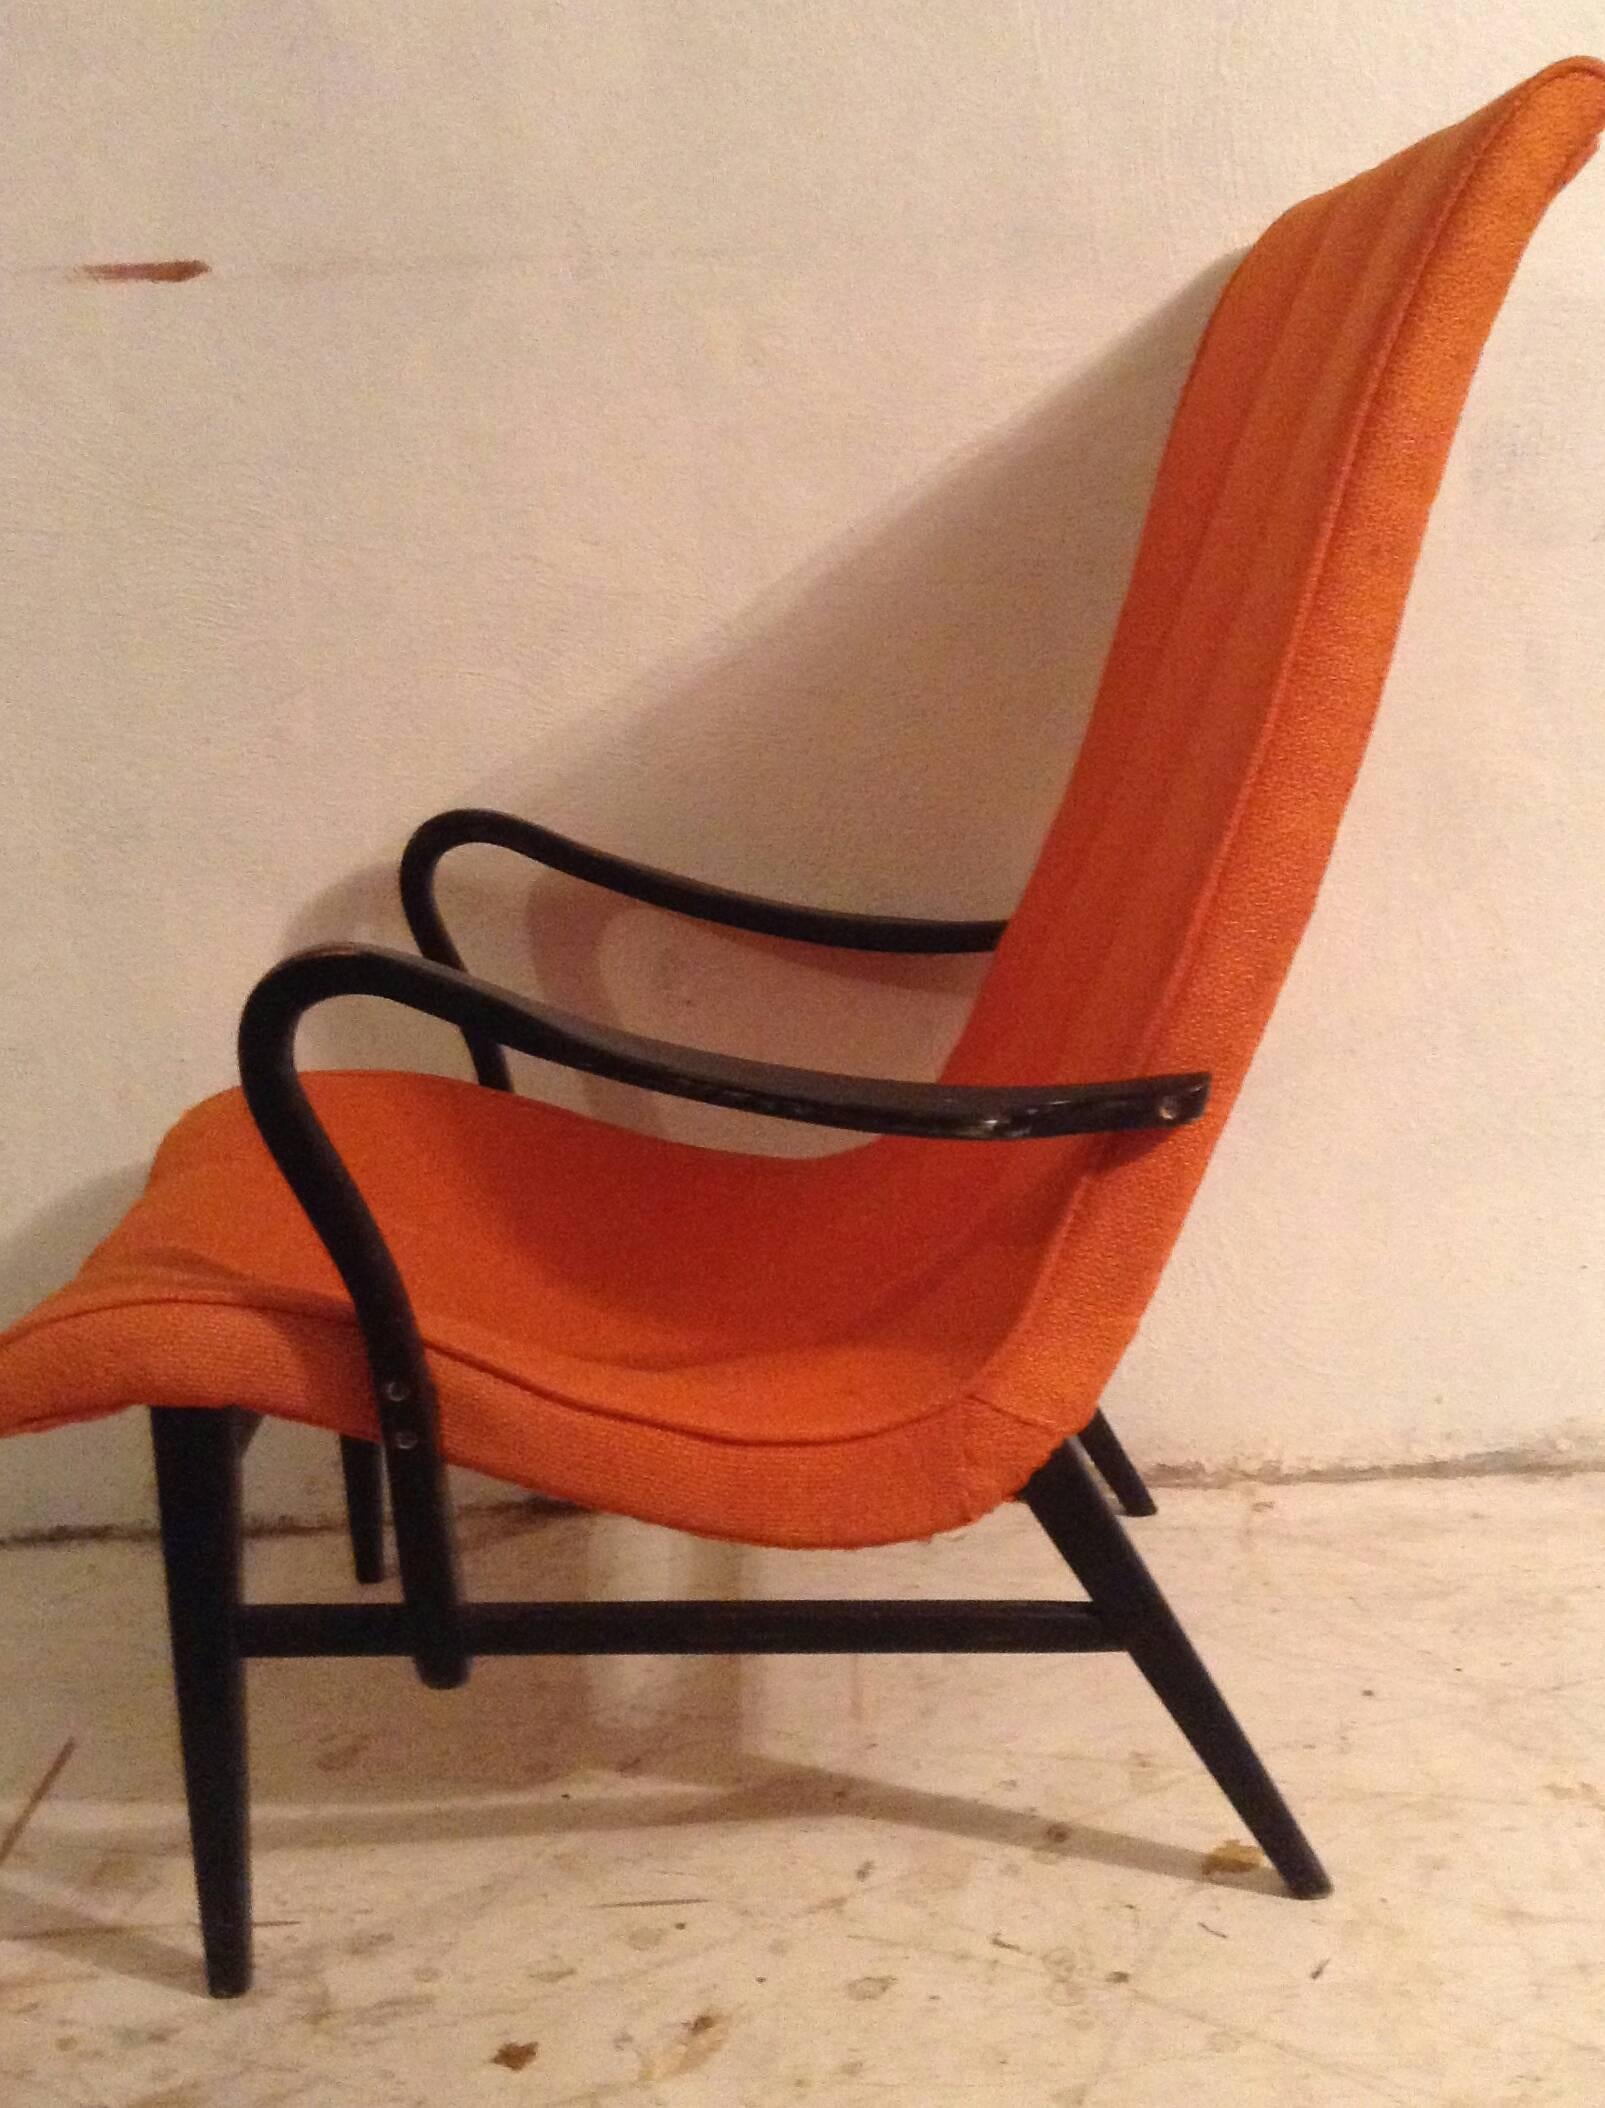 Modernist high back lounge chair, made in Japan, in the manner of Bruno Mathsson. Recently acquired from a gentleman who originally purchased chair in Japan. Retains original tangerine orange wool fabric, minor wear to front corners, also retains